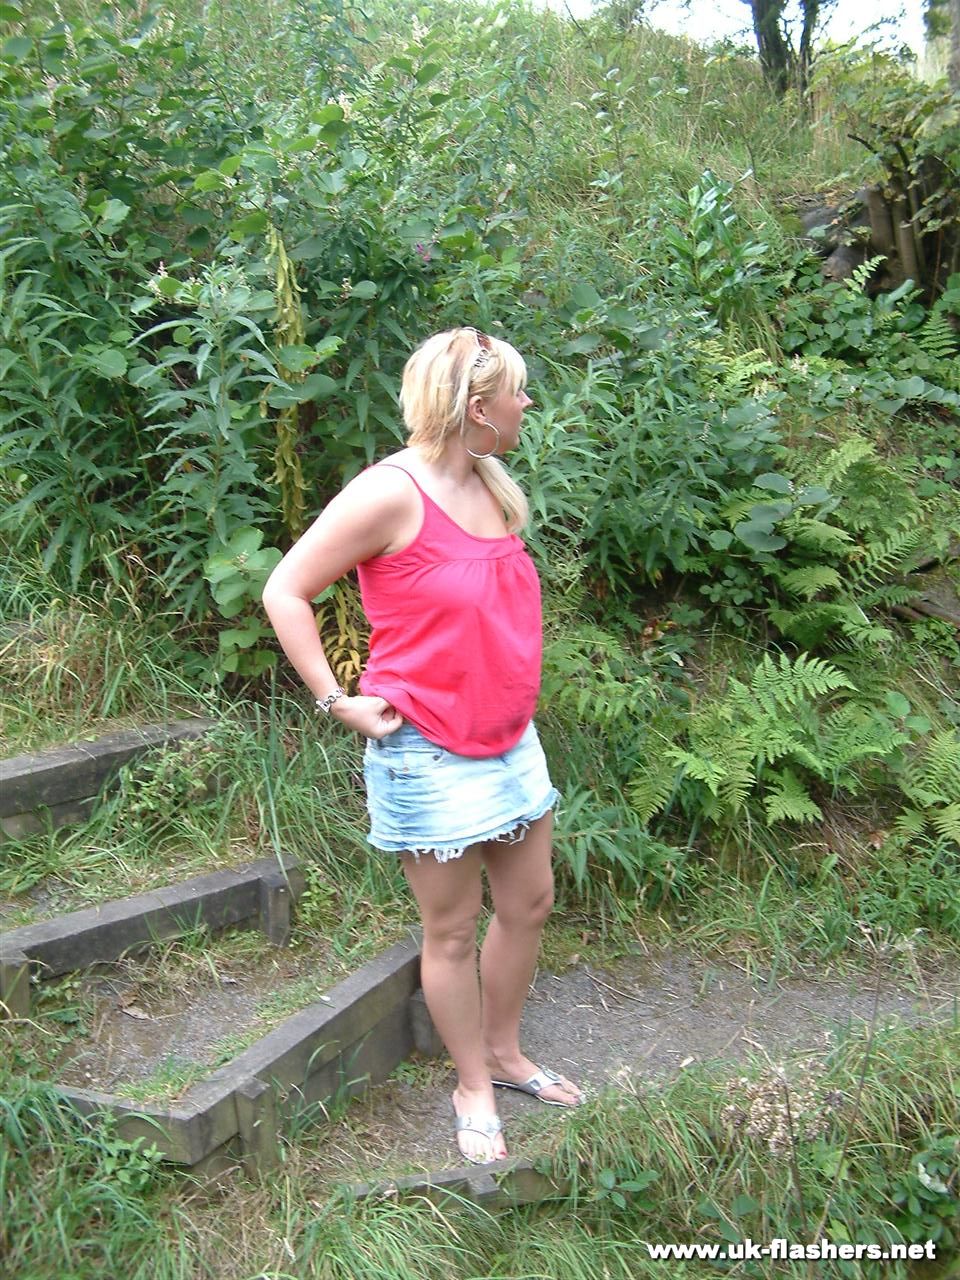 Overweight UK female with blonde hair strips naked on a popular walking trails ポルノ写真 #428021522 | UK Flashers Pics, Lena Leigh, Public, モバイルポルノ